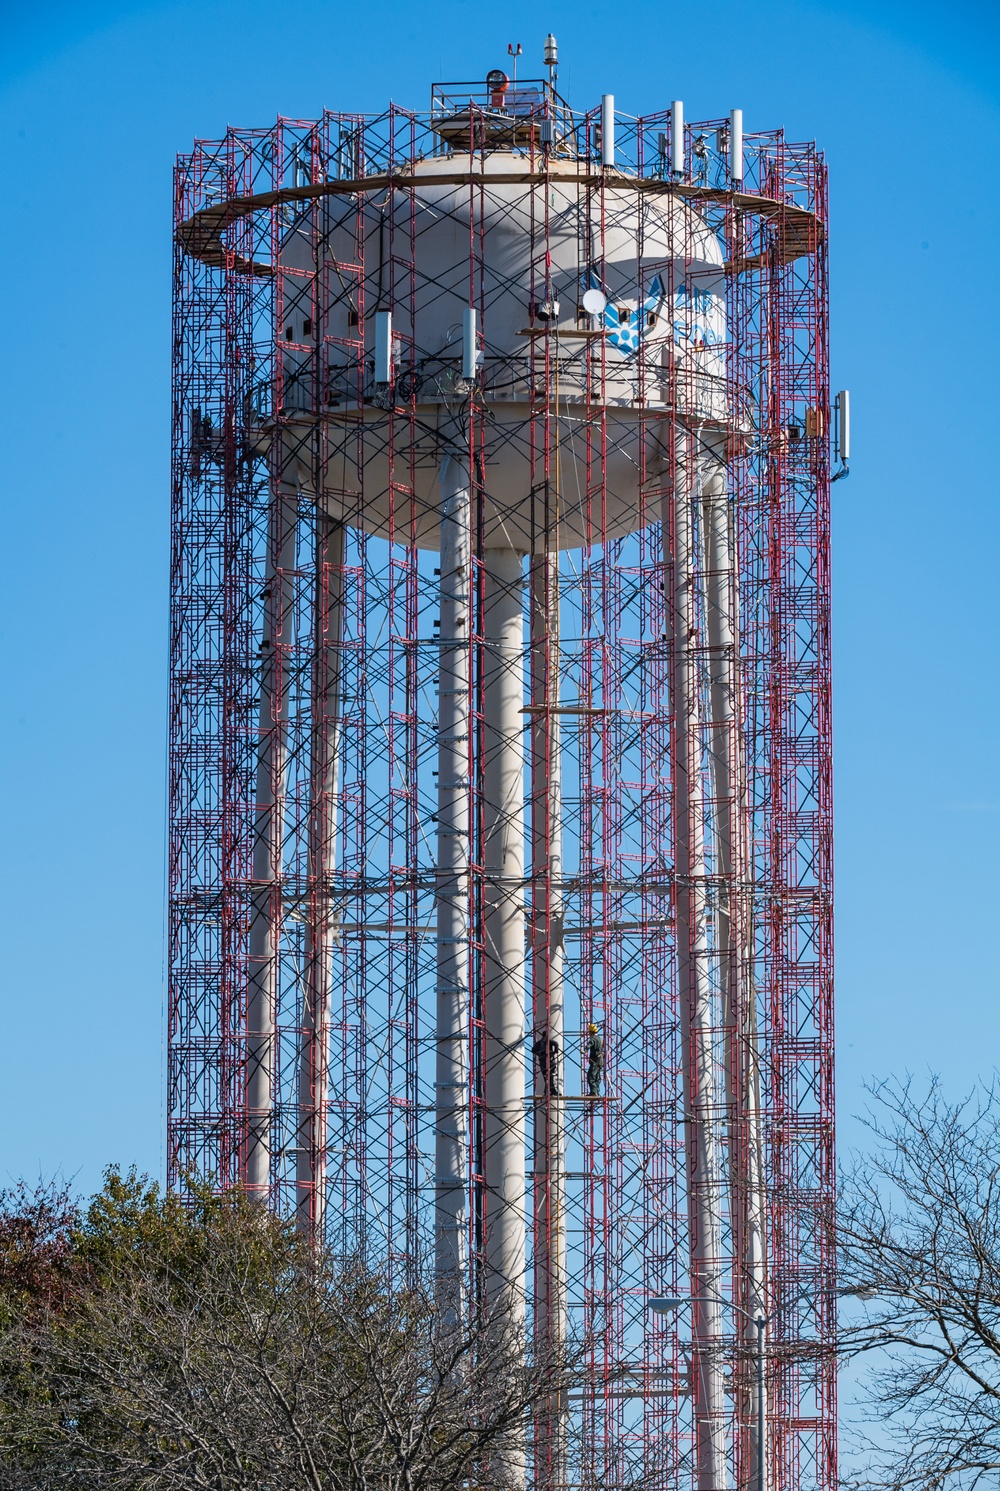 Dover AFB water tower gets restored